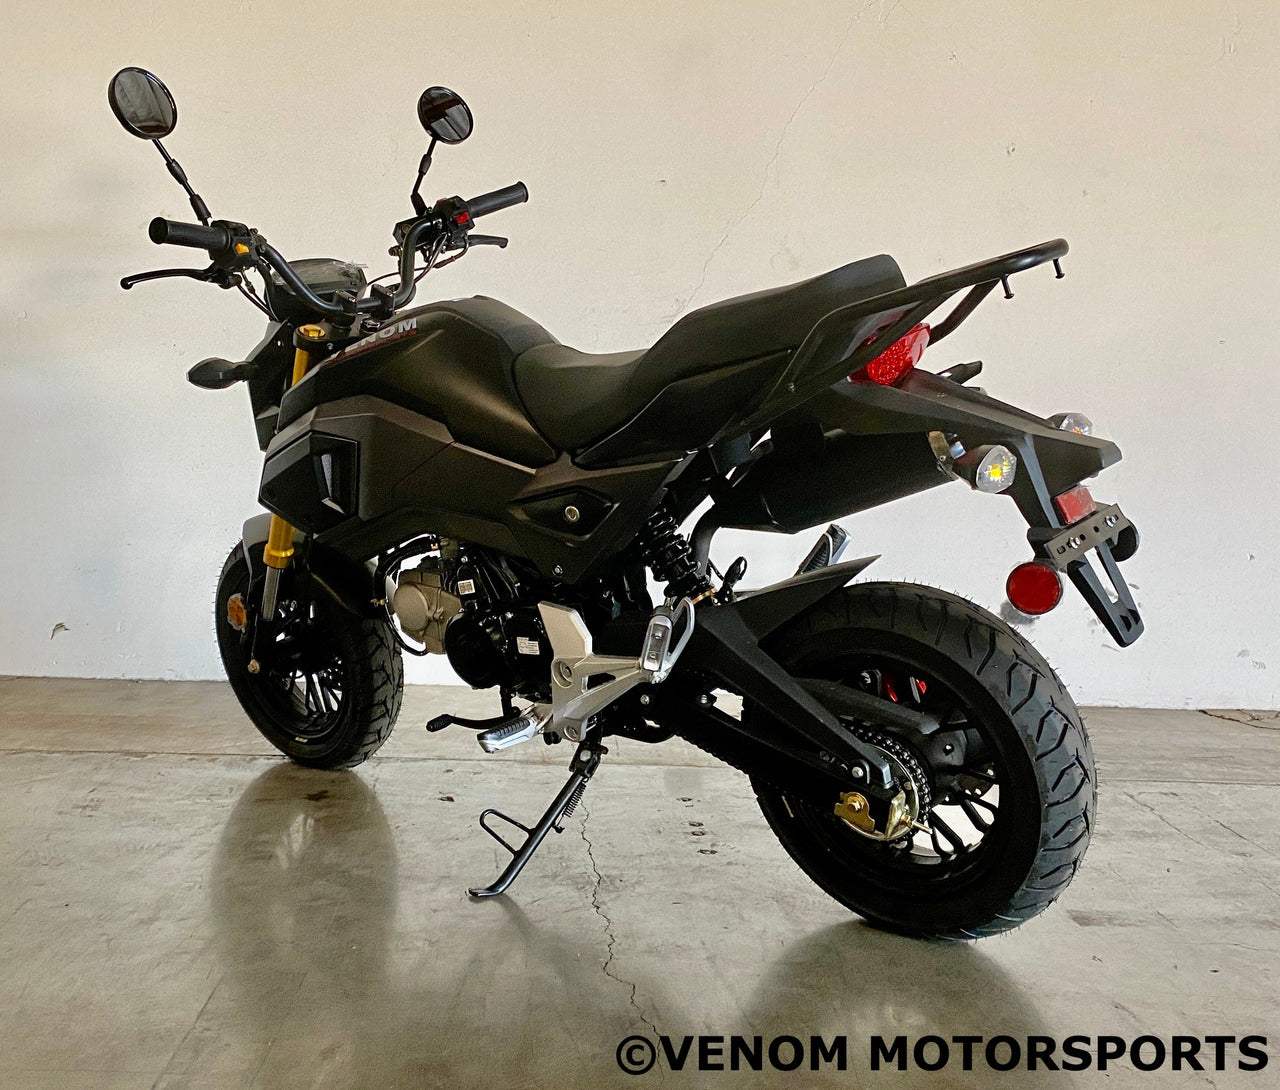 BD125-10 grom clone motorcycle for sale online.